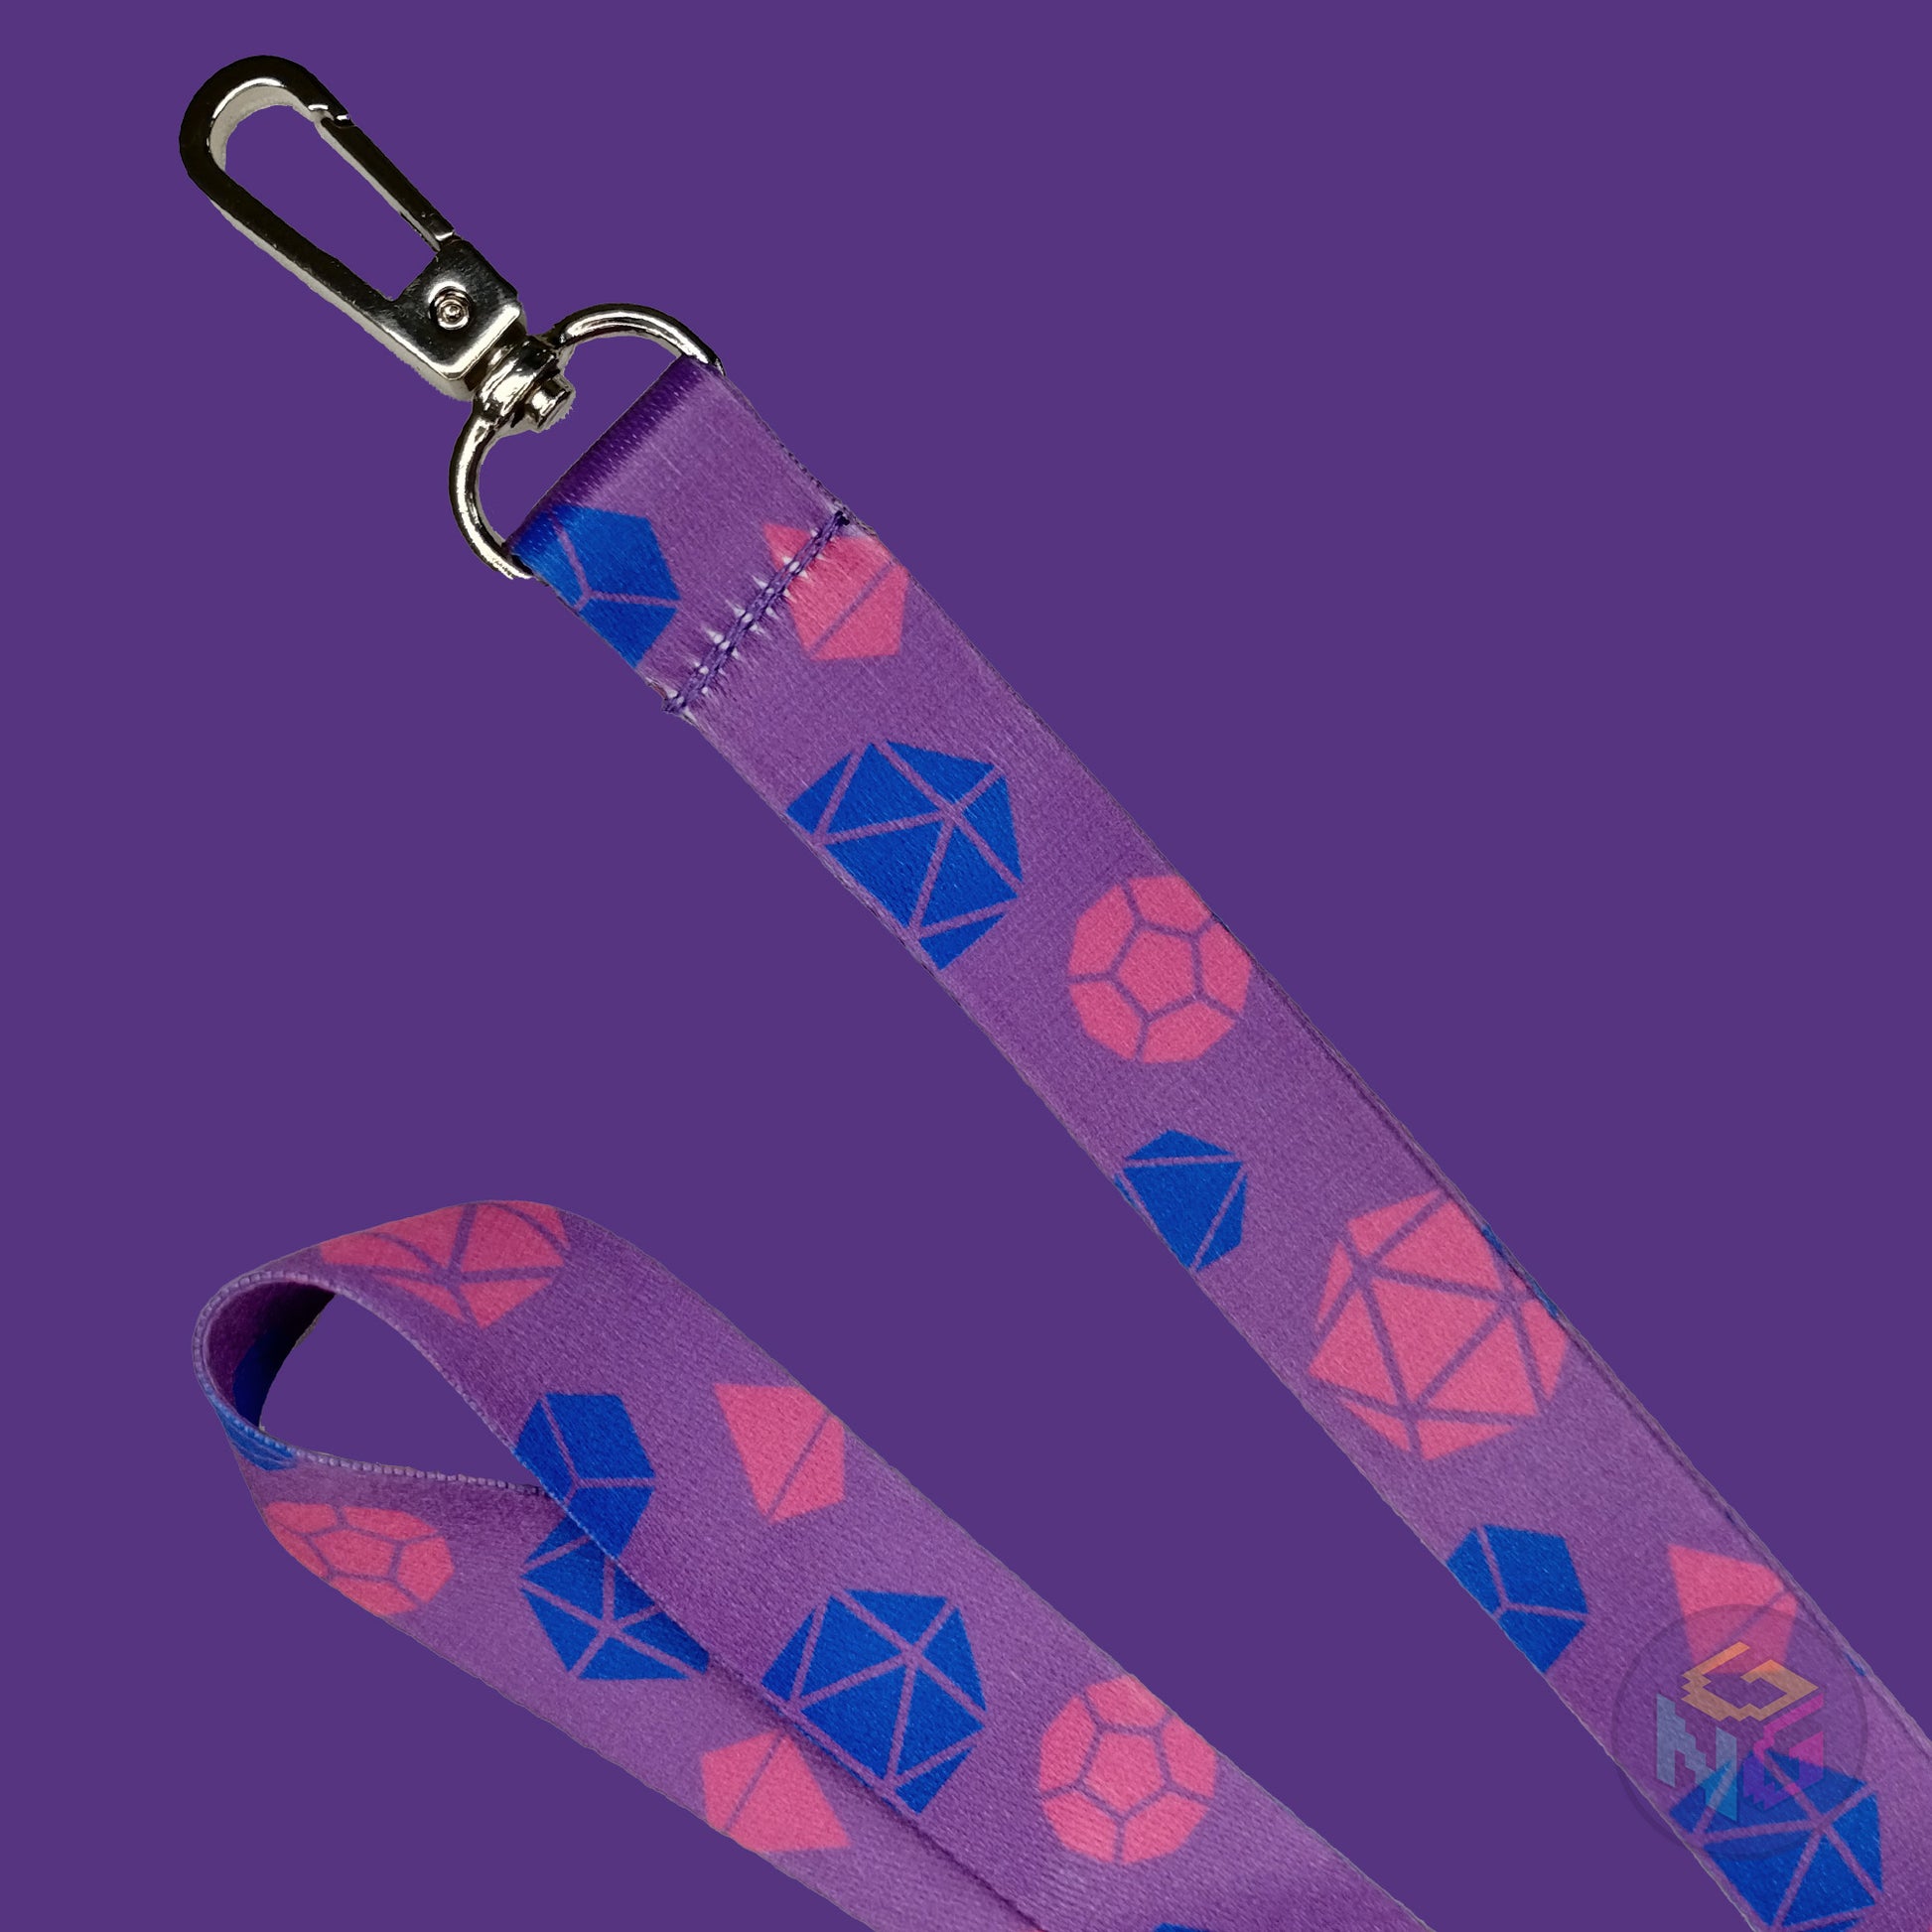 close up detail of the bisexual dungeons and dragons lanyard showing the lobster clasp, blue d20s, pink d4s, and other dice